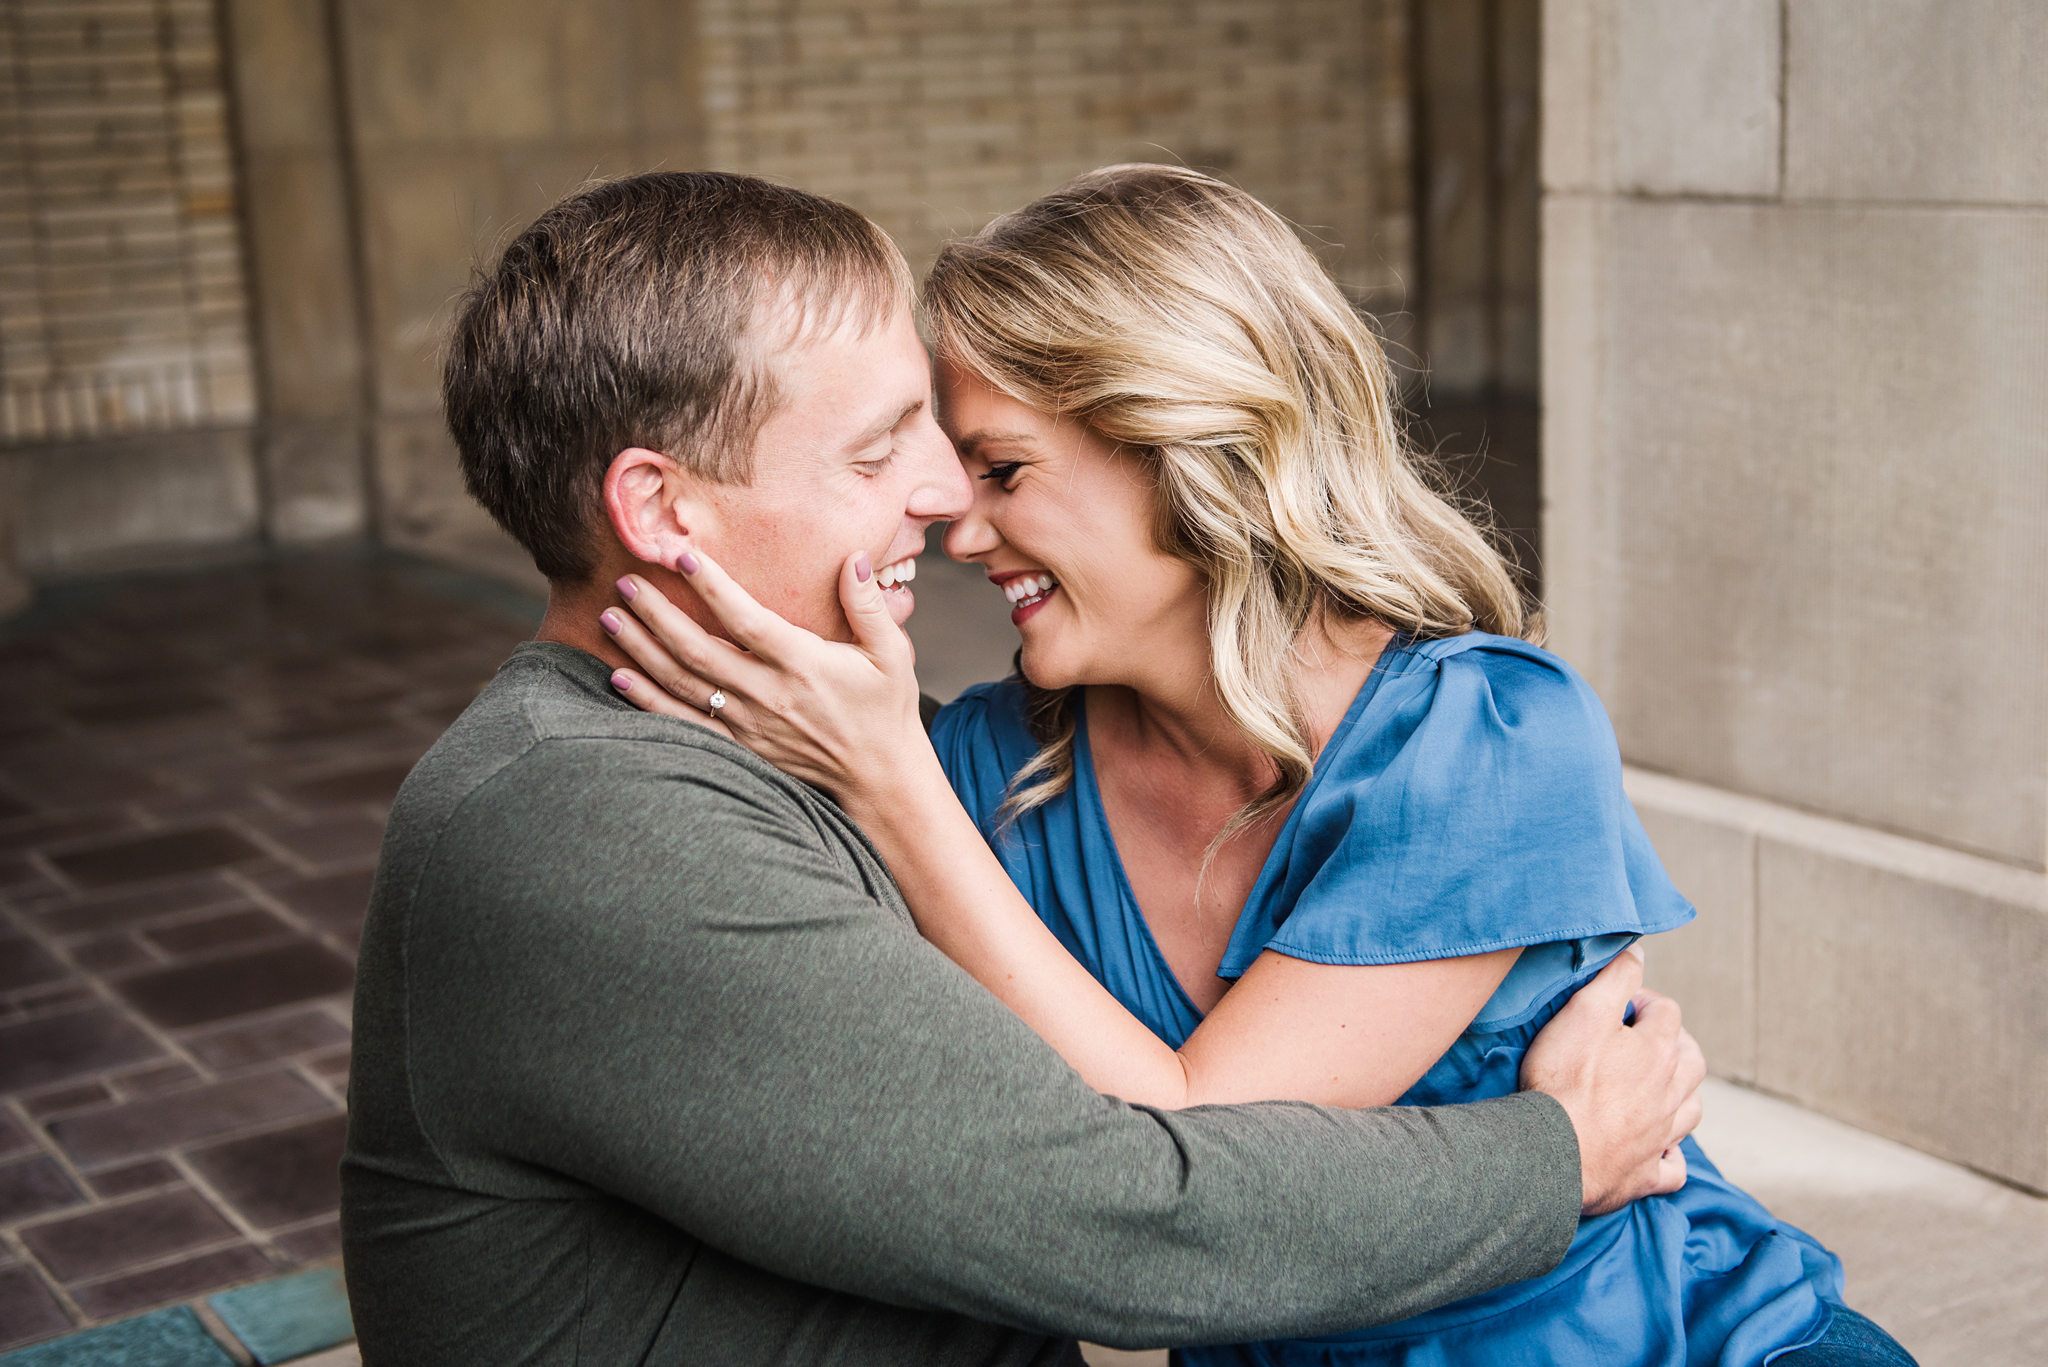 George_Eastman_House_Rochester_Yacht_Club_Rochester_Engagement_Session_JILL_STUDIO_Rochester_NY_Photographer_DSC_7989.jpg